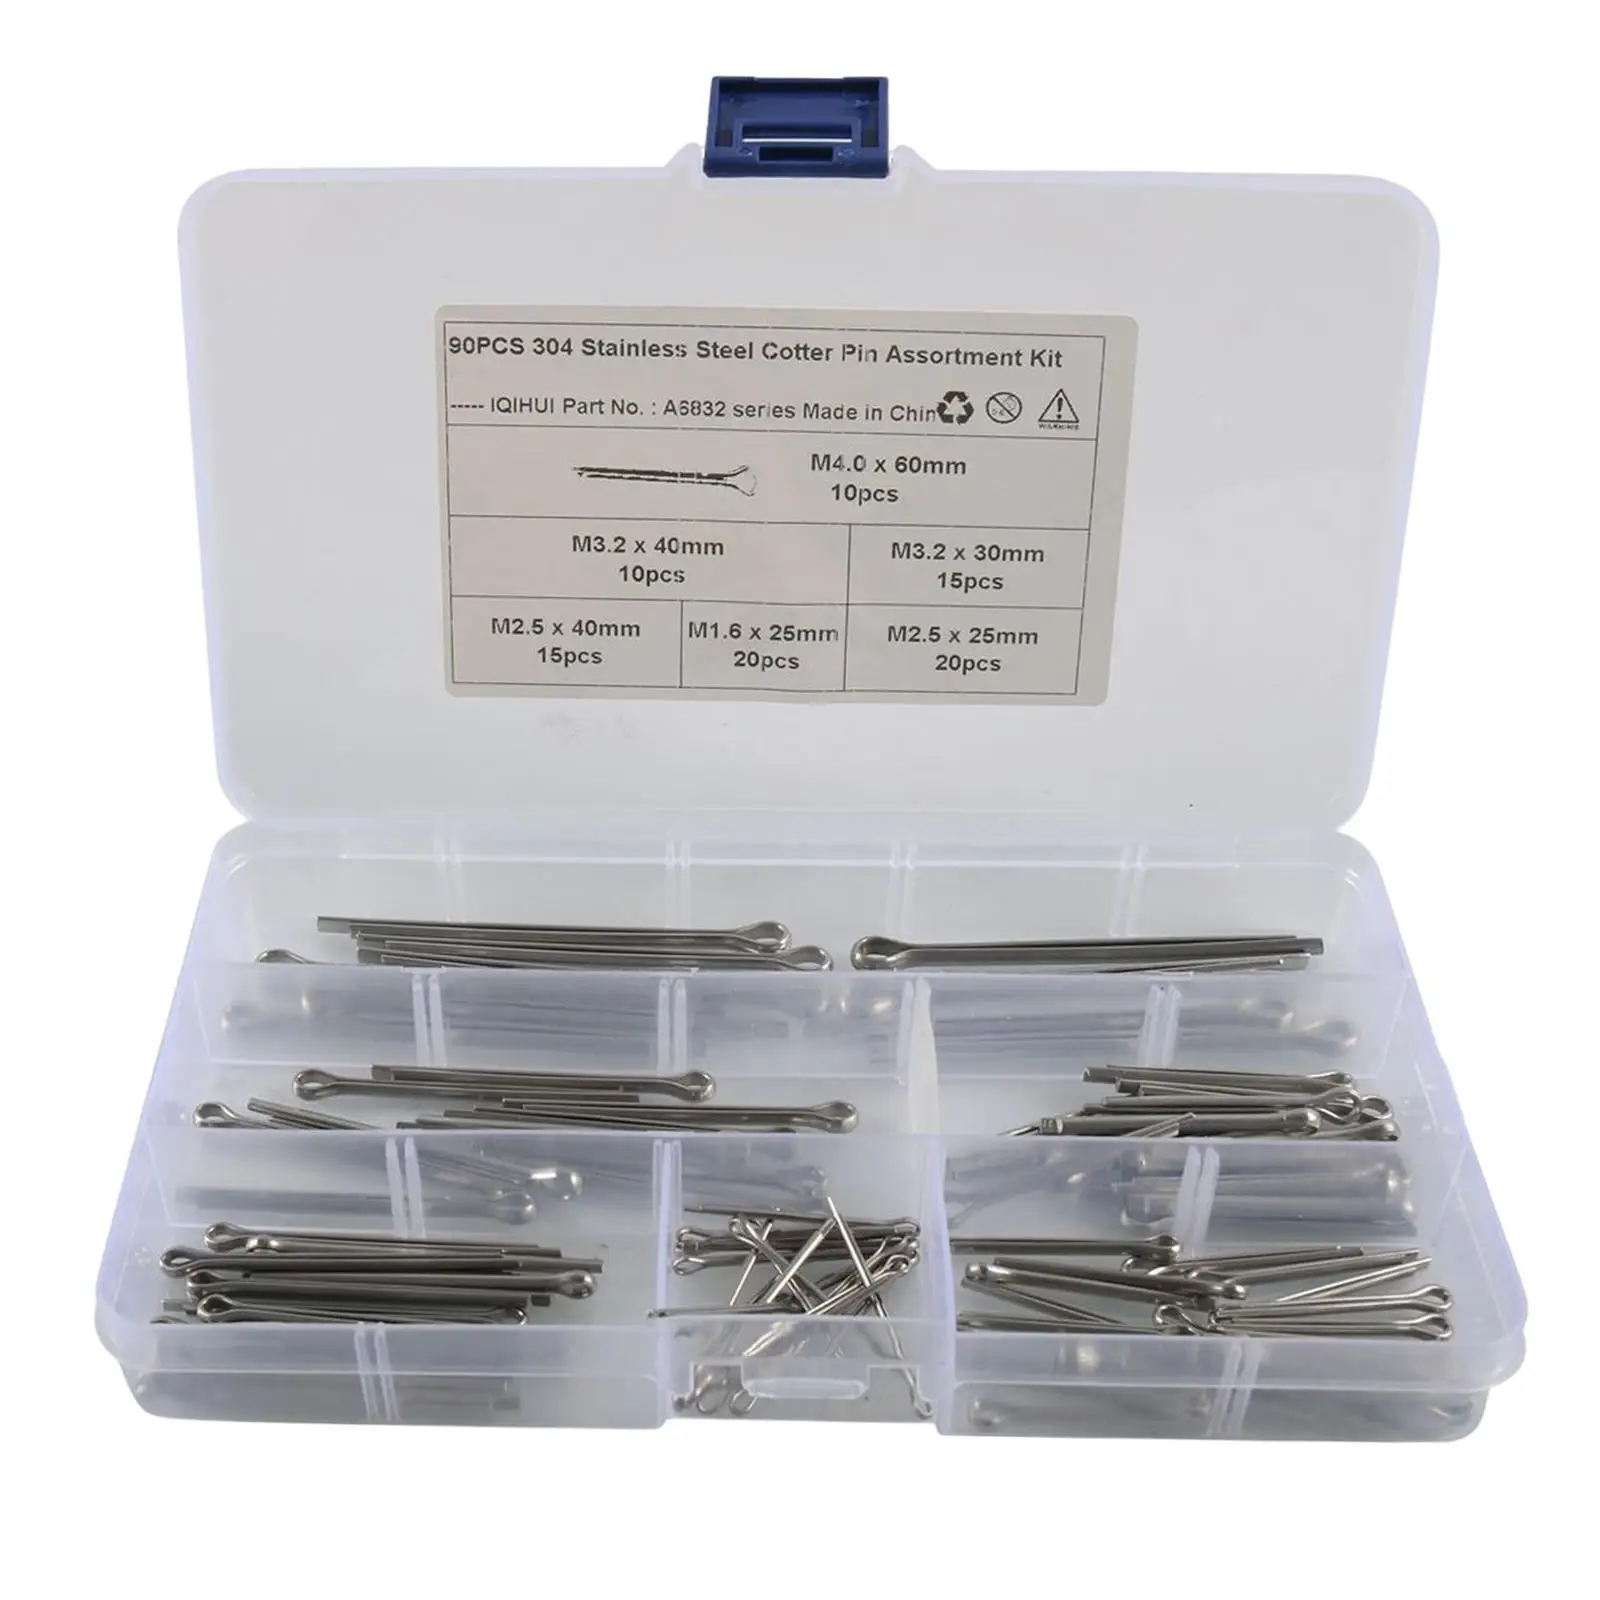 90x Cotter Pin Assortment Kit Assortment Tool with Container Box 304 Stainless Steel Cotter Pin Clip for Trucks Cars Workshops